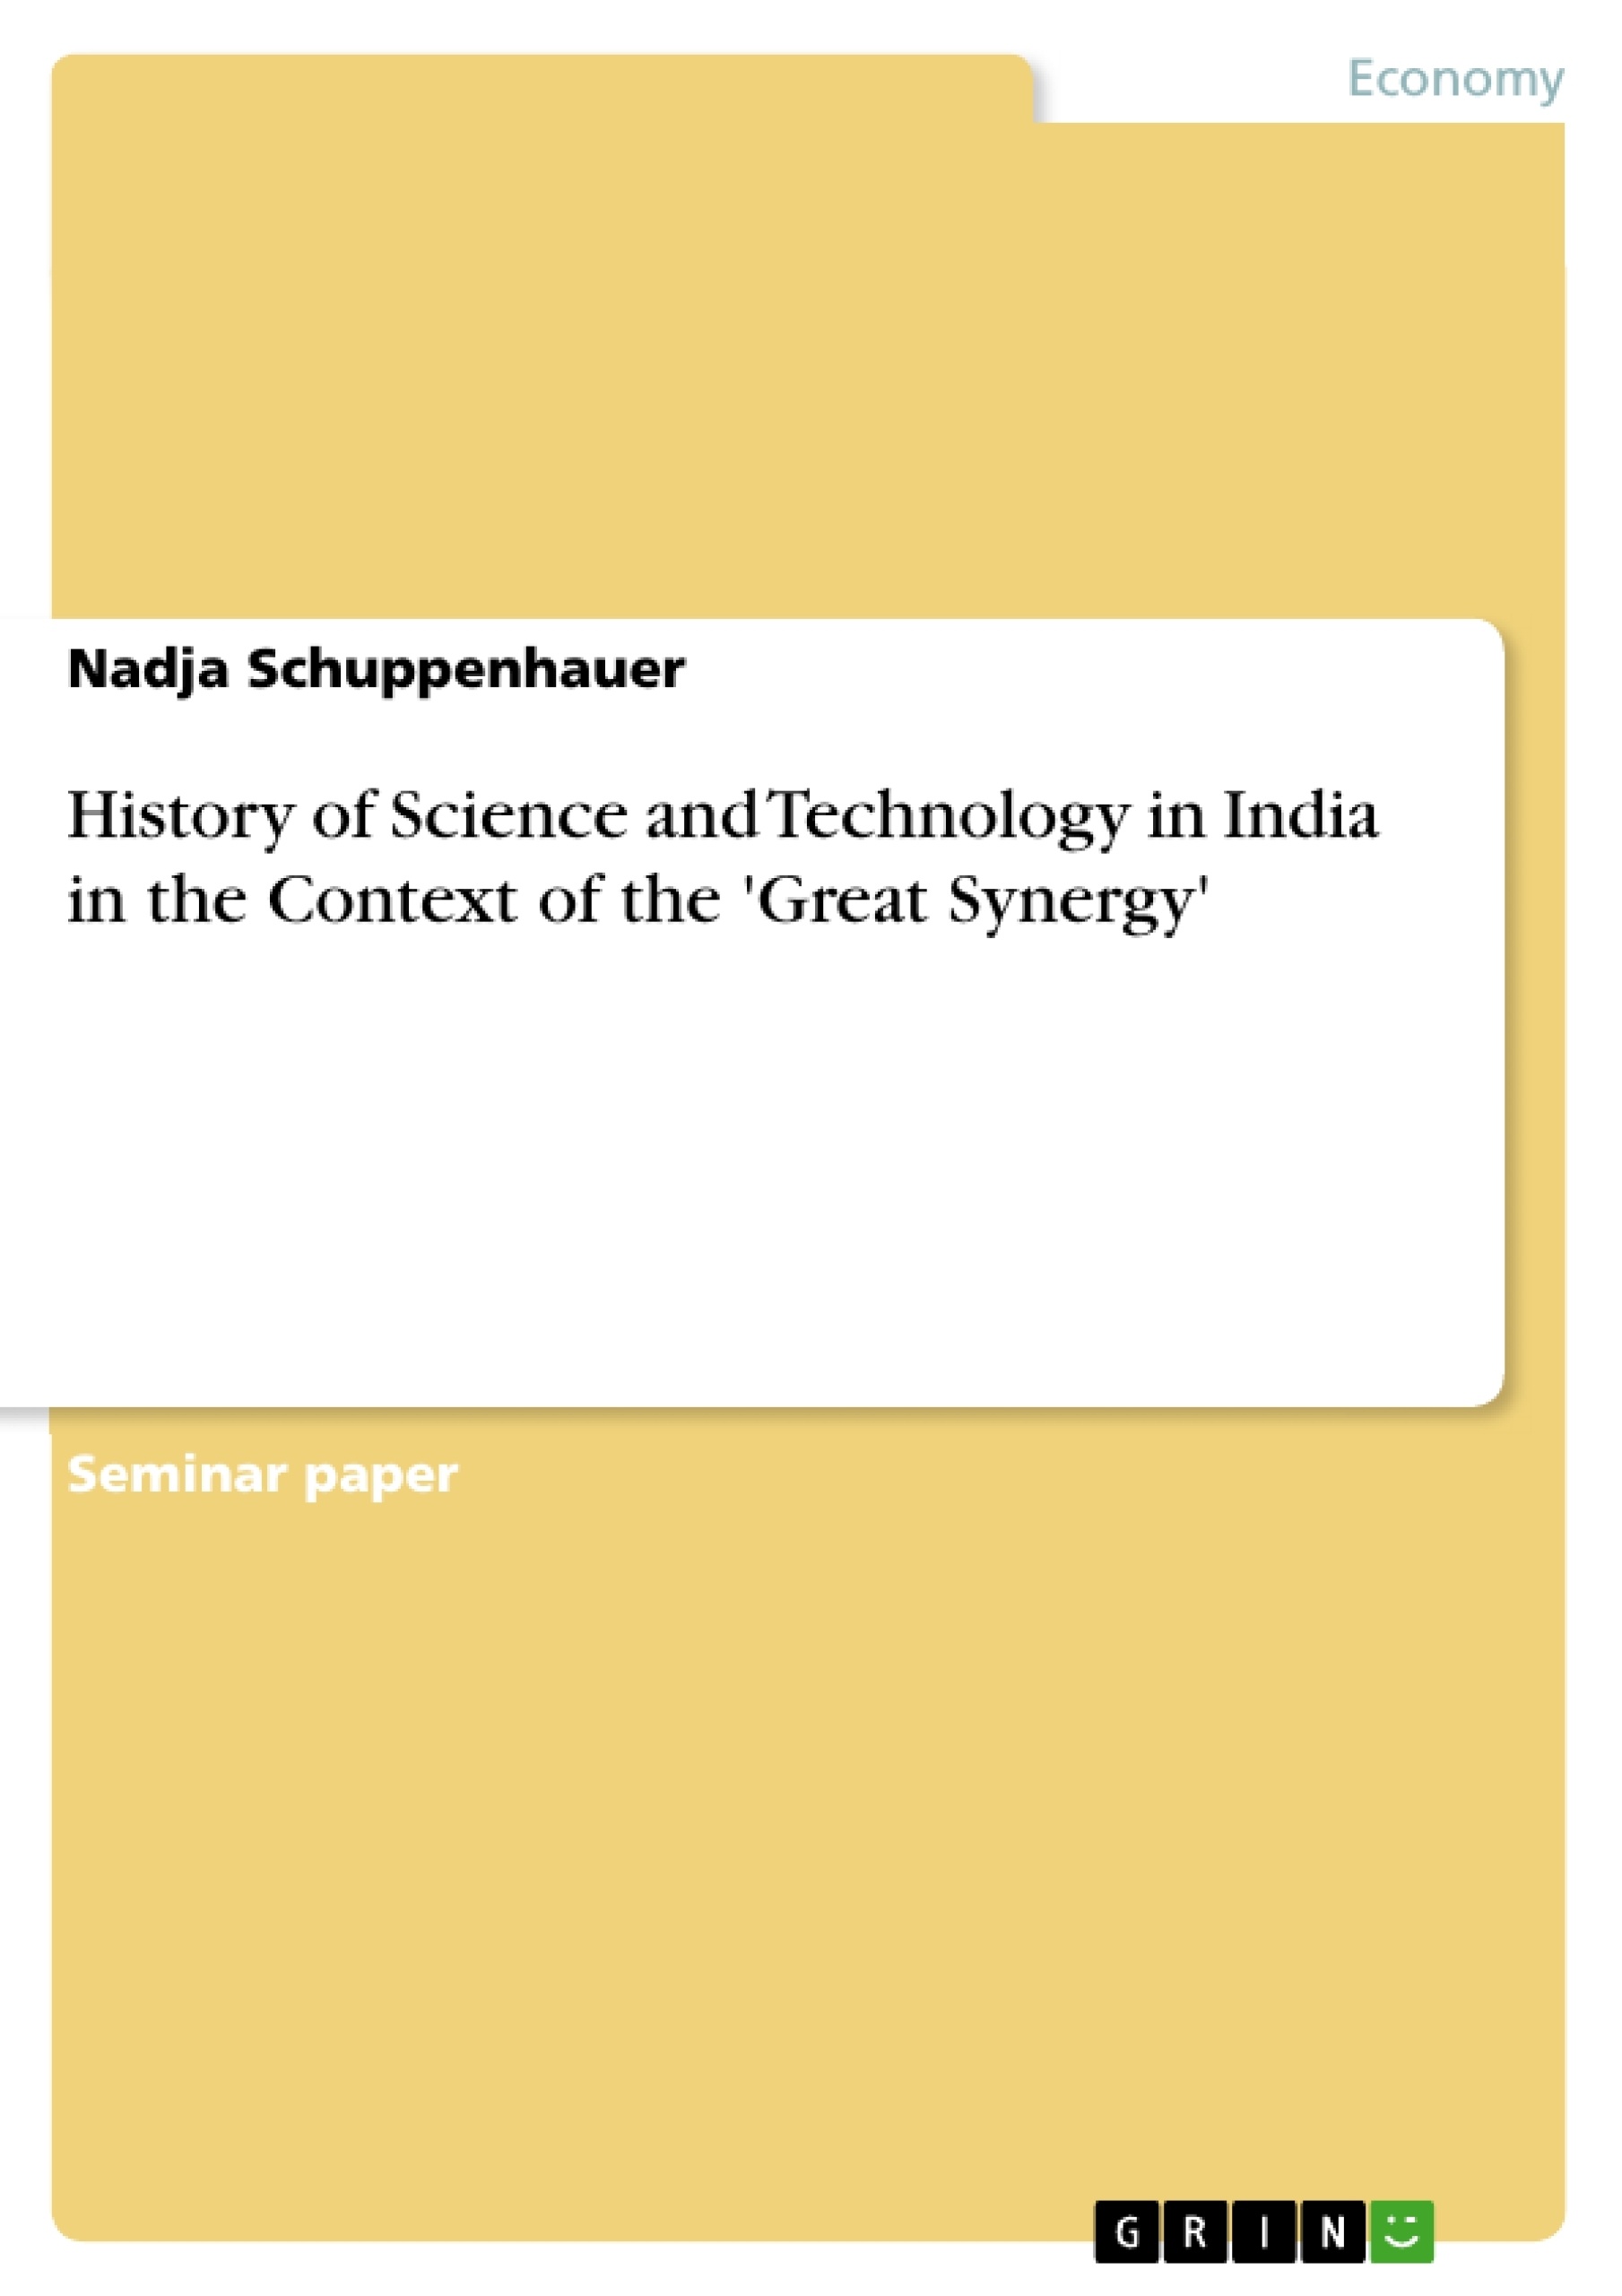 Titel: History of Science and Technology in India in the Context of the 'Great Synergy'